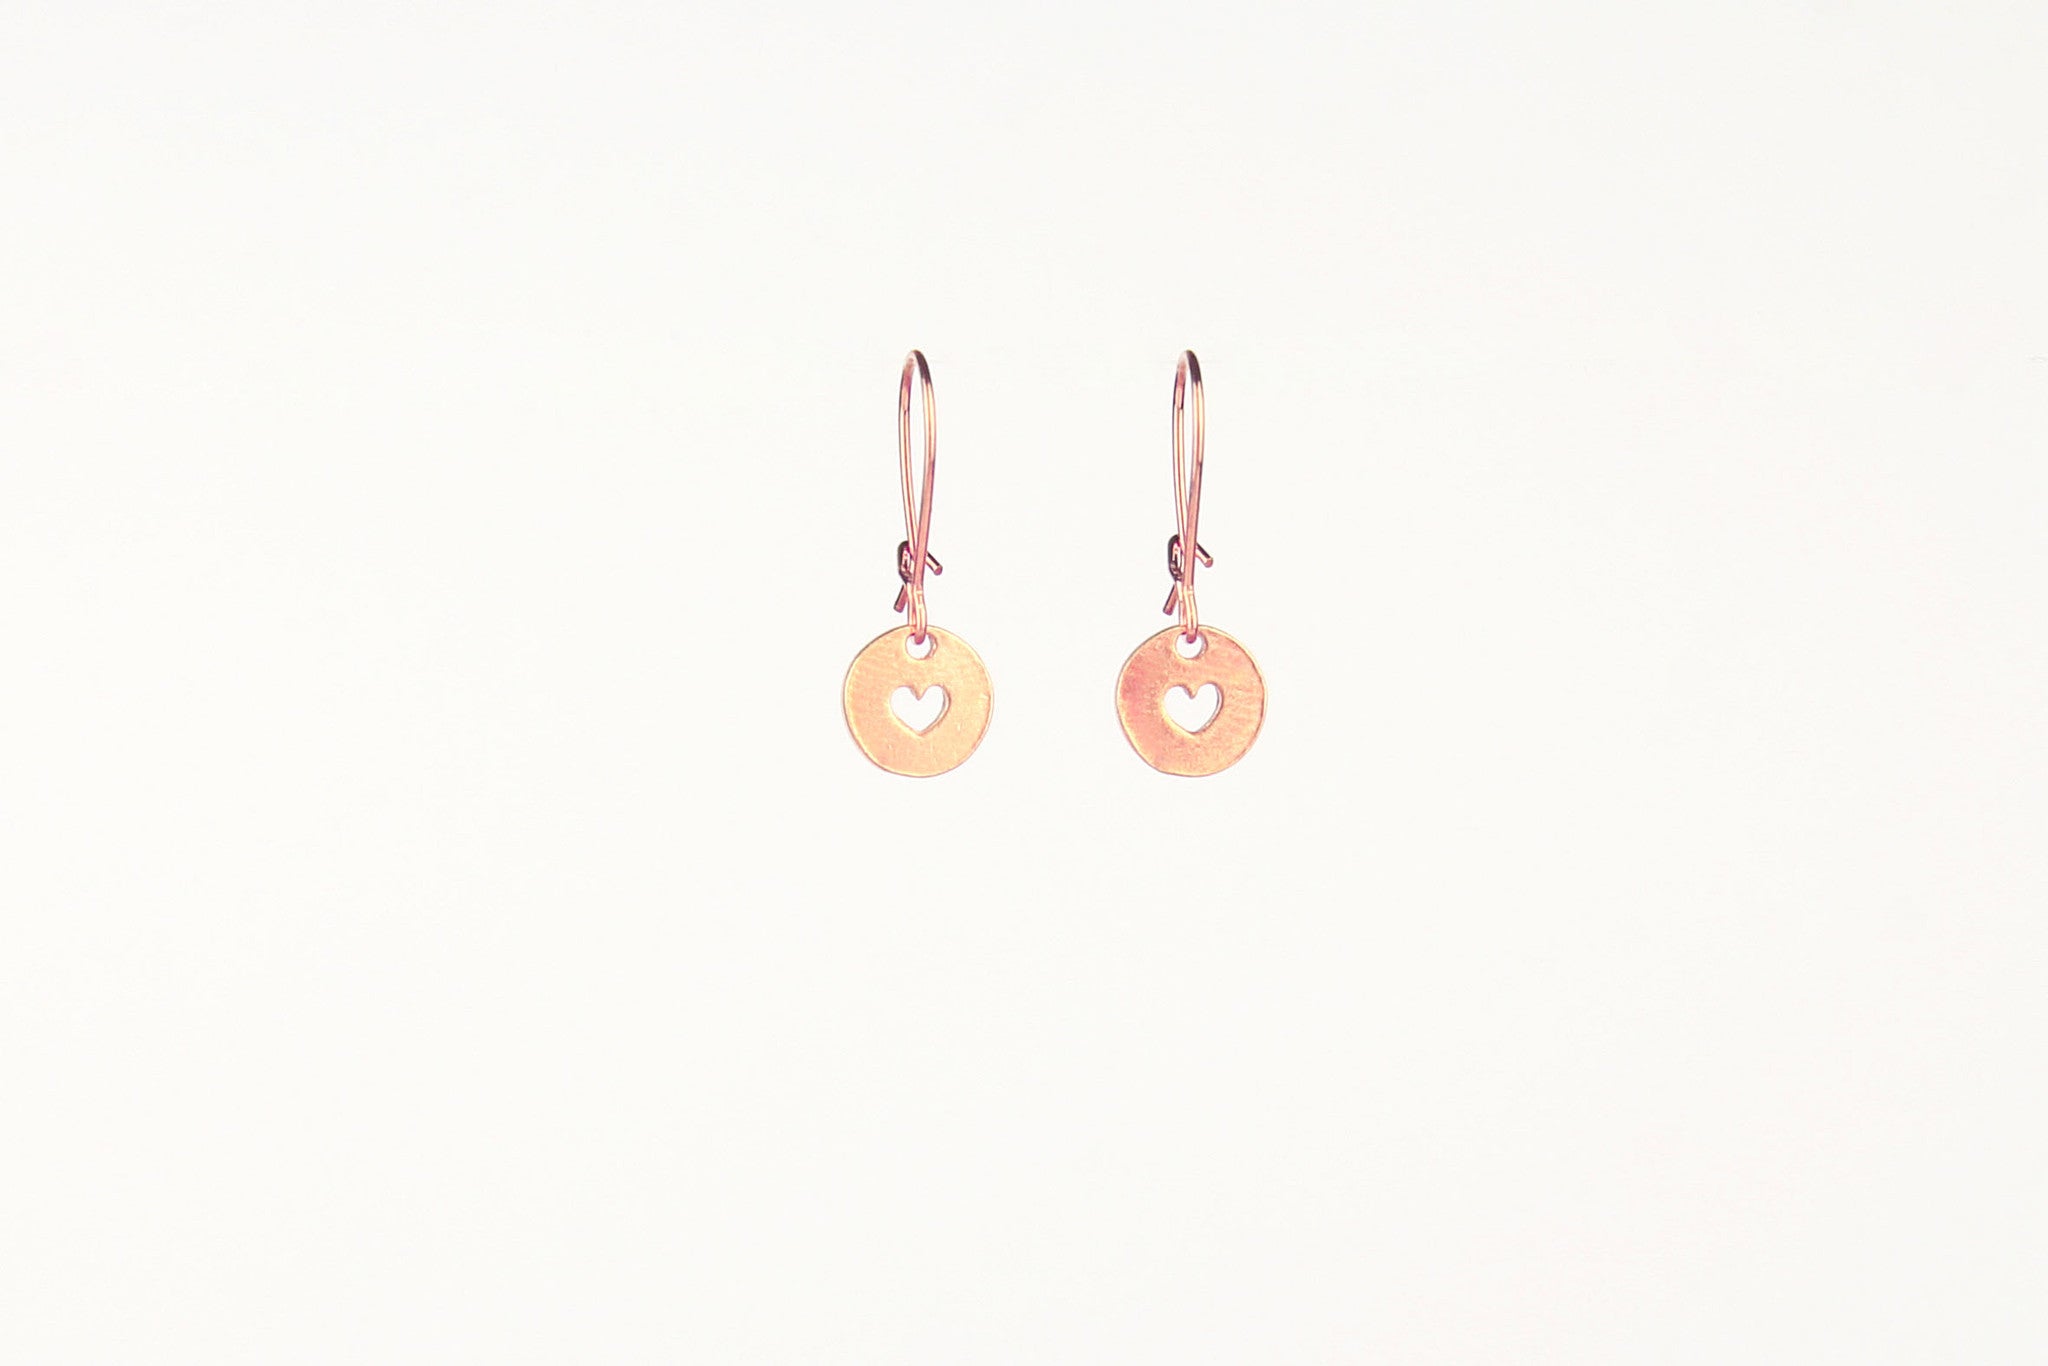 jewelberry ohrringe earrings love token rose gold plated sterling silver fine jewelry handmade with love fairtrade